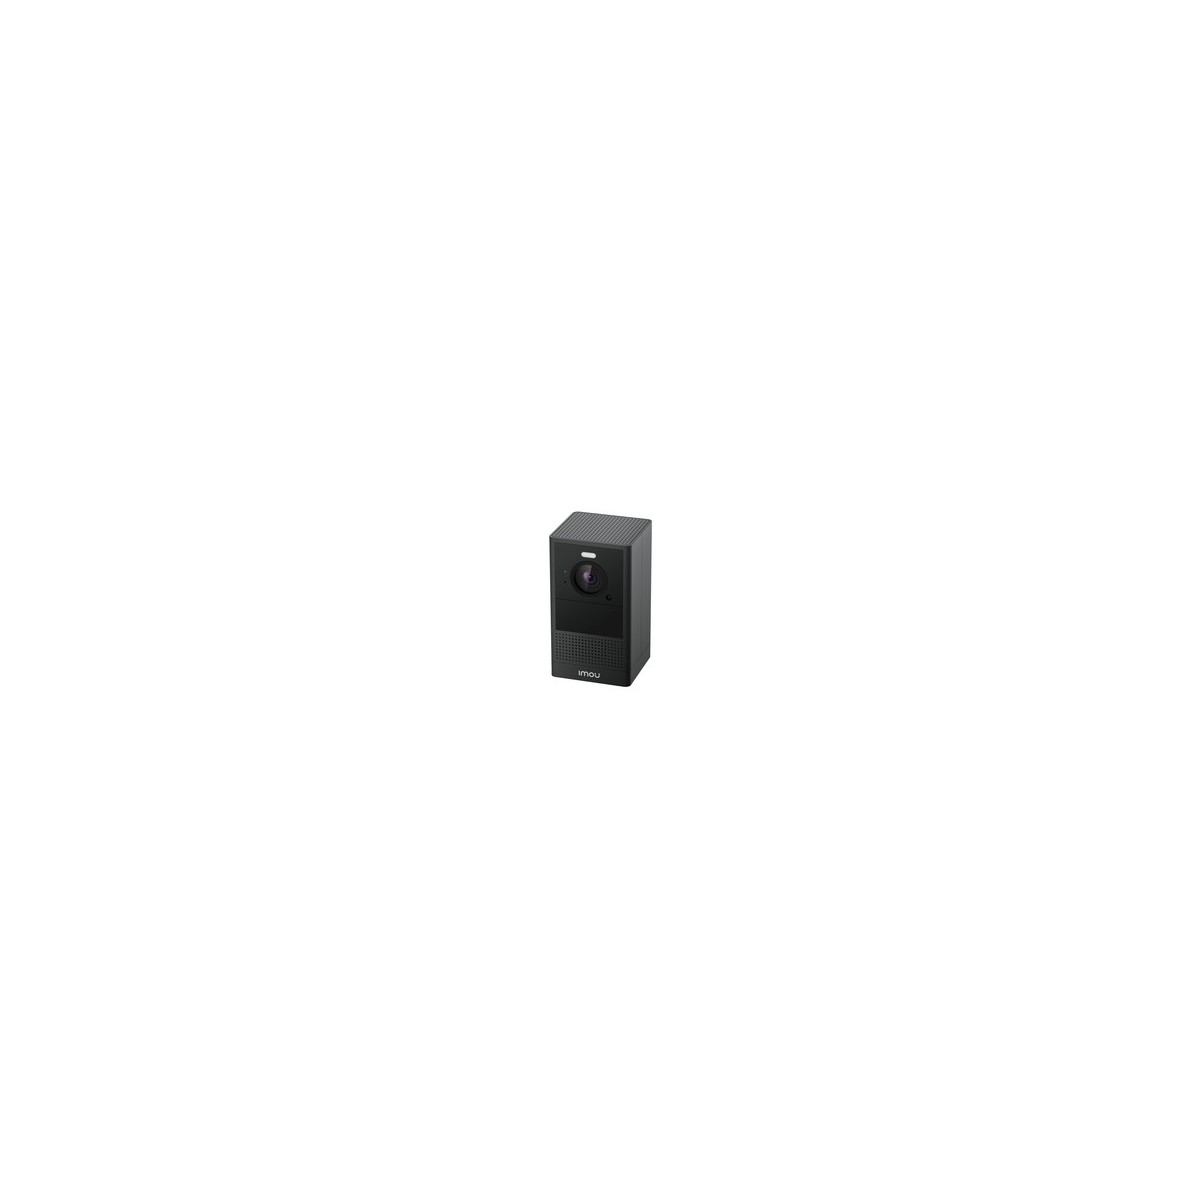 Dahua Imou Cell 2 - IP security camera - Outdoor - Wireless - CE - FCC - IC - Cube - Wall